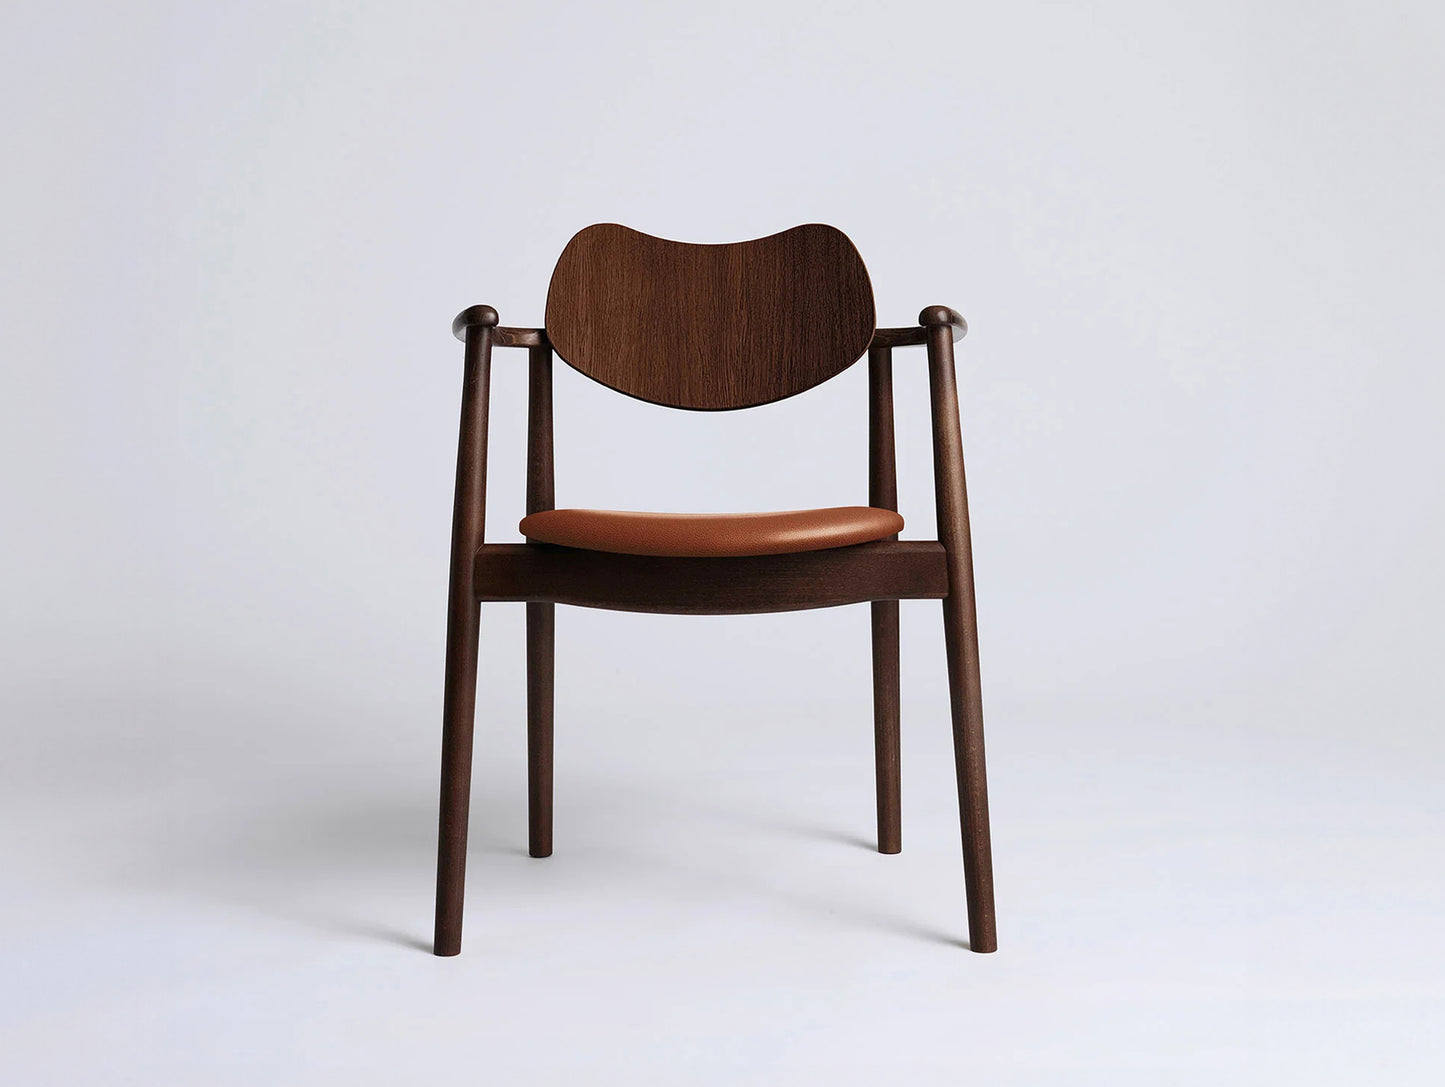 Regatta Chair Seat Upholstered by Ro Collection - Walnut Stained Beech / Standard Calvados Leather